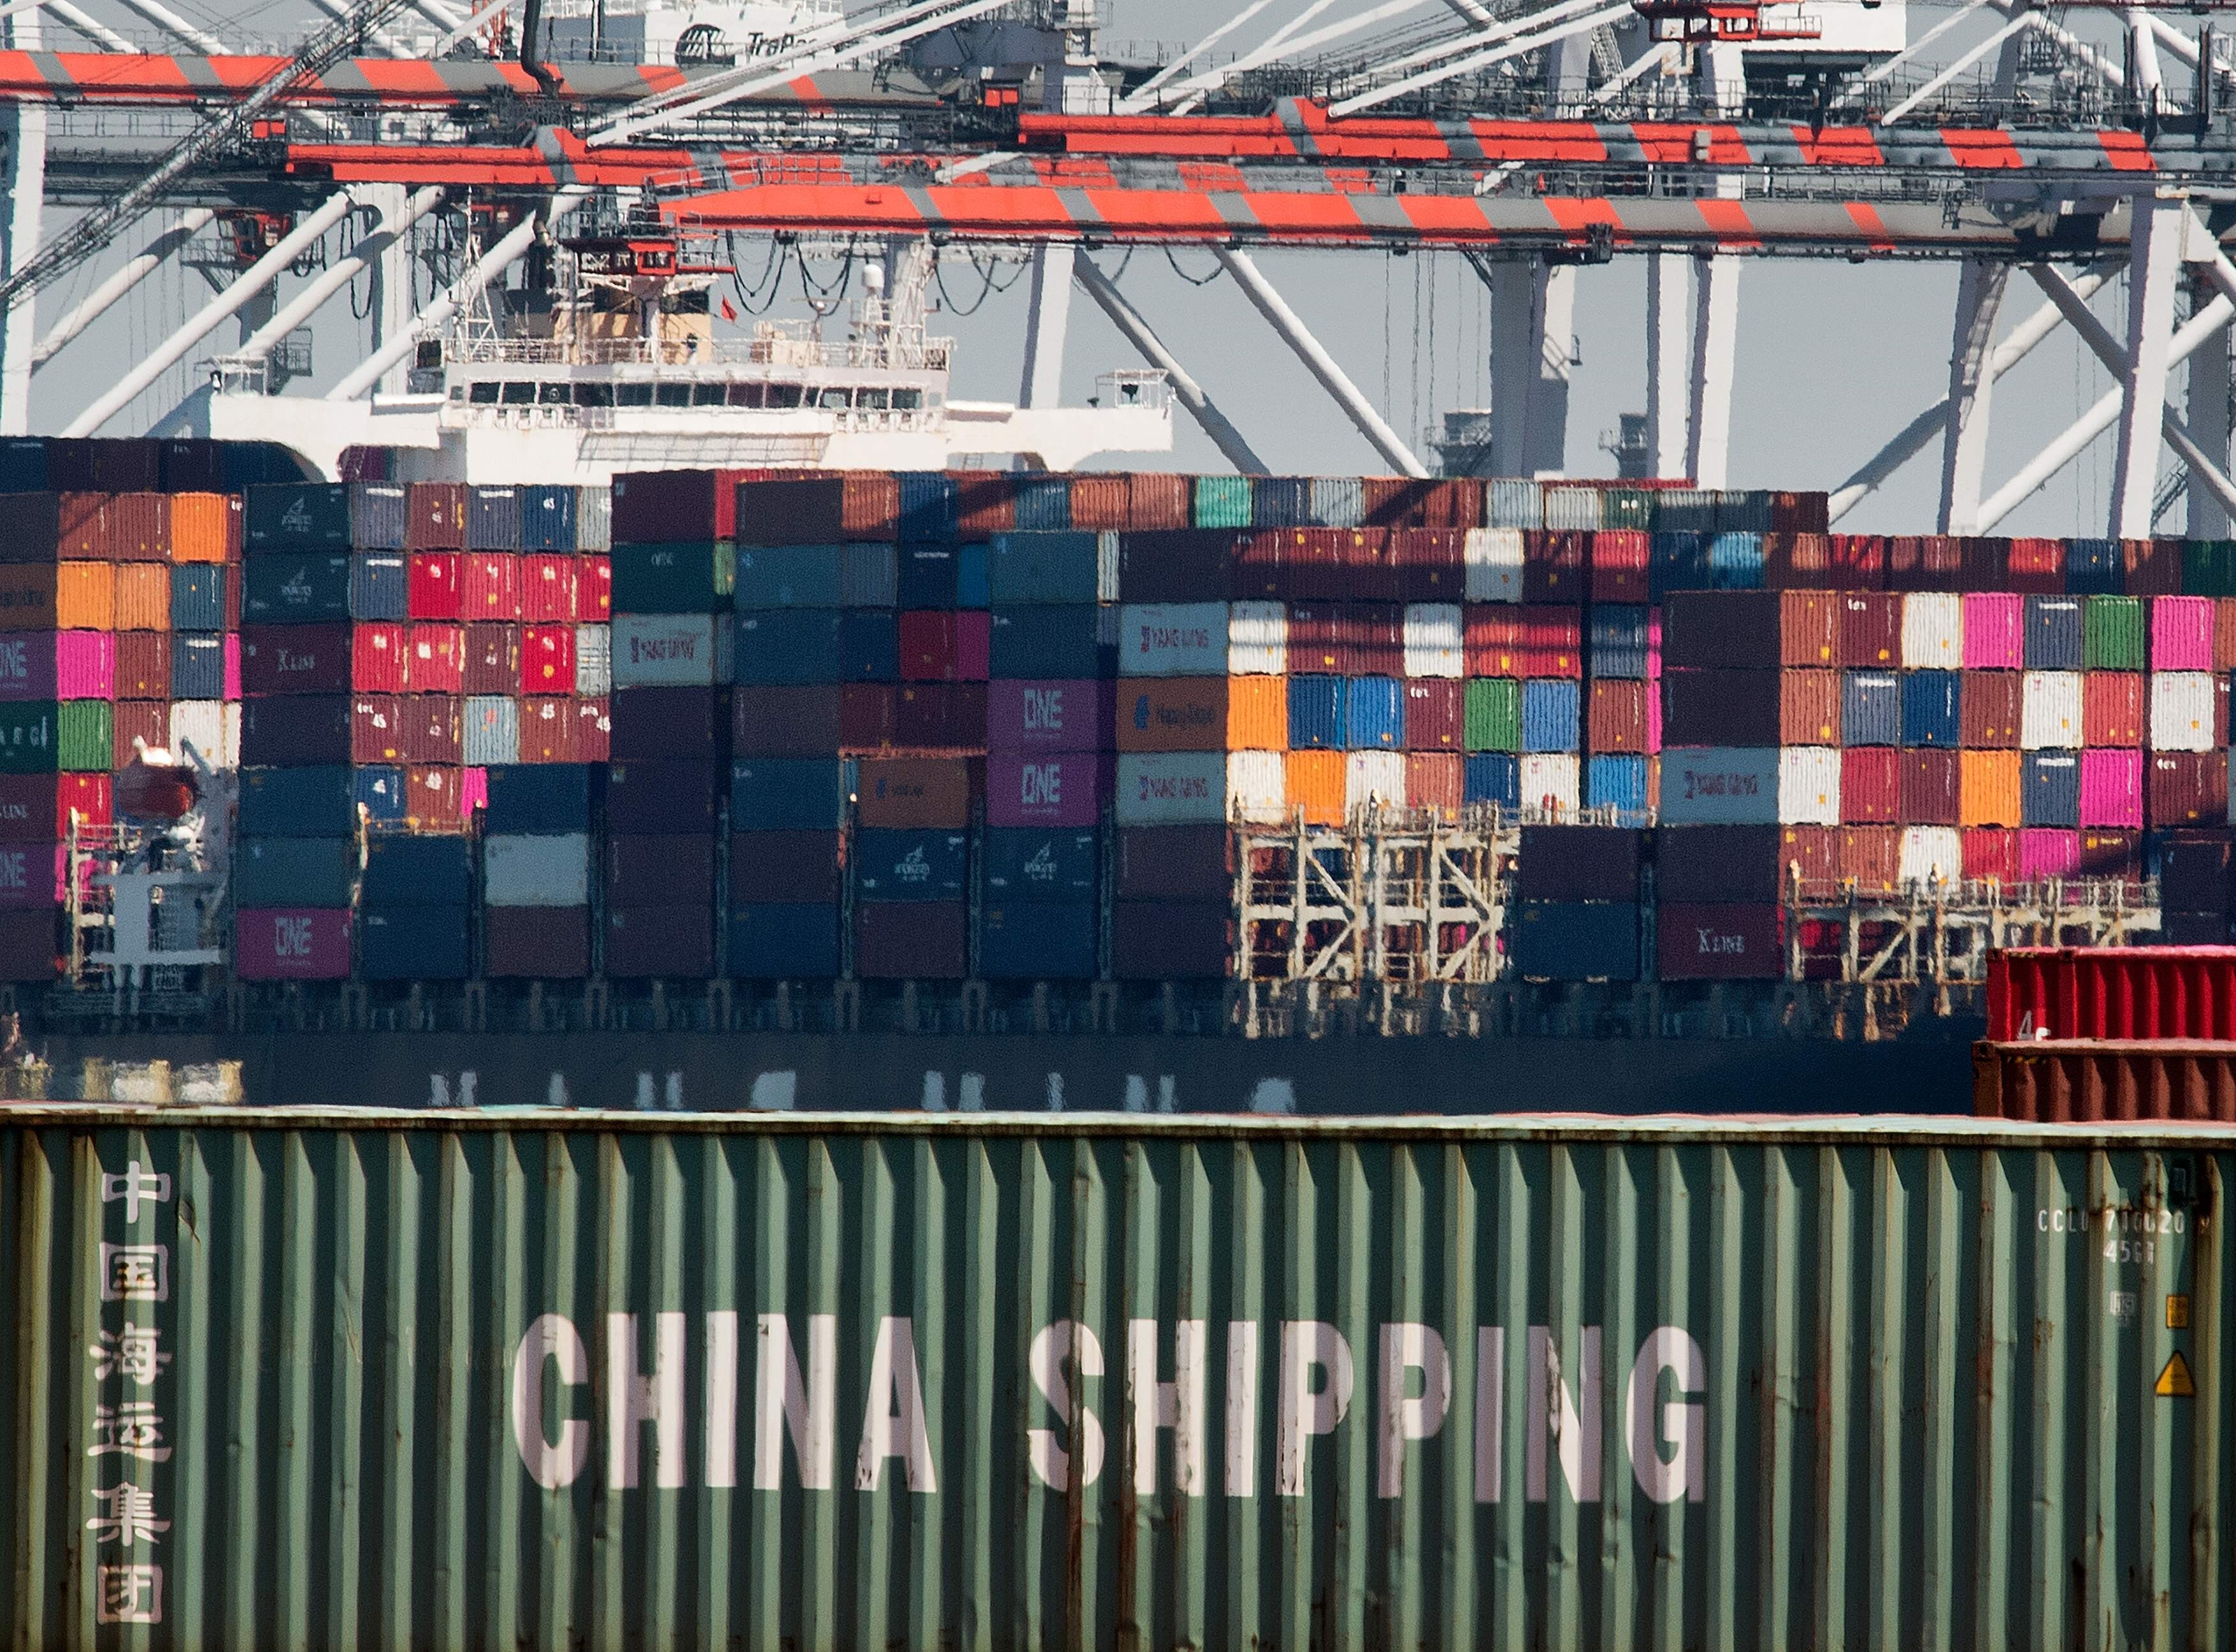 Shipping containers from China and other Asian countries at the Port of Los Angeles in September 2019. Photo: AFP